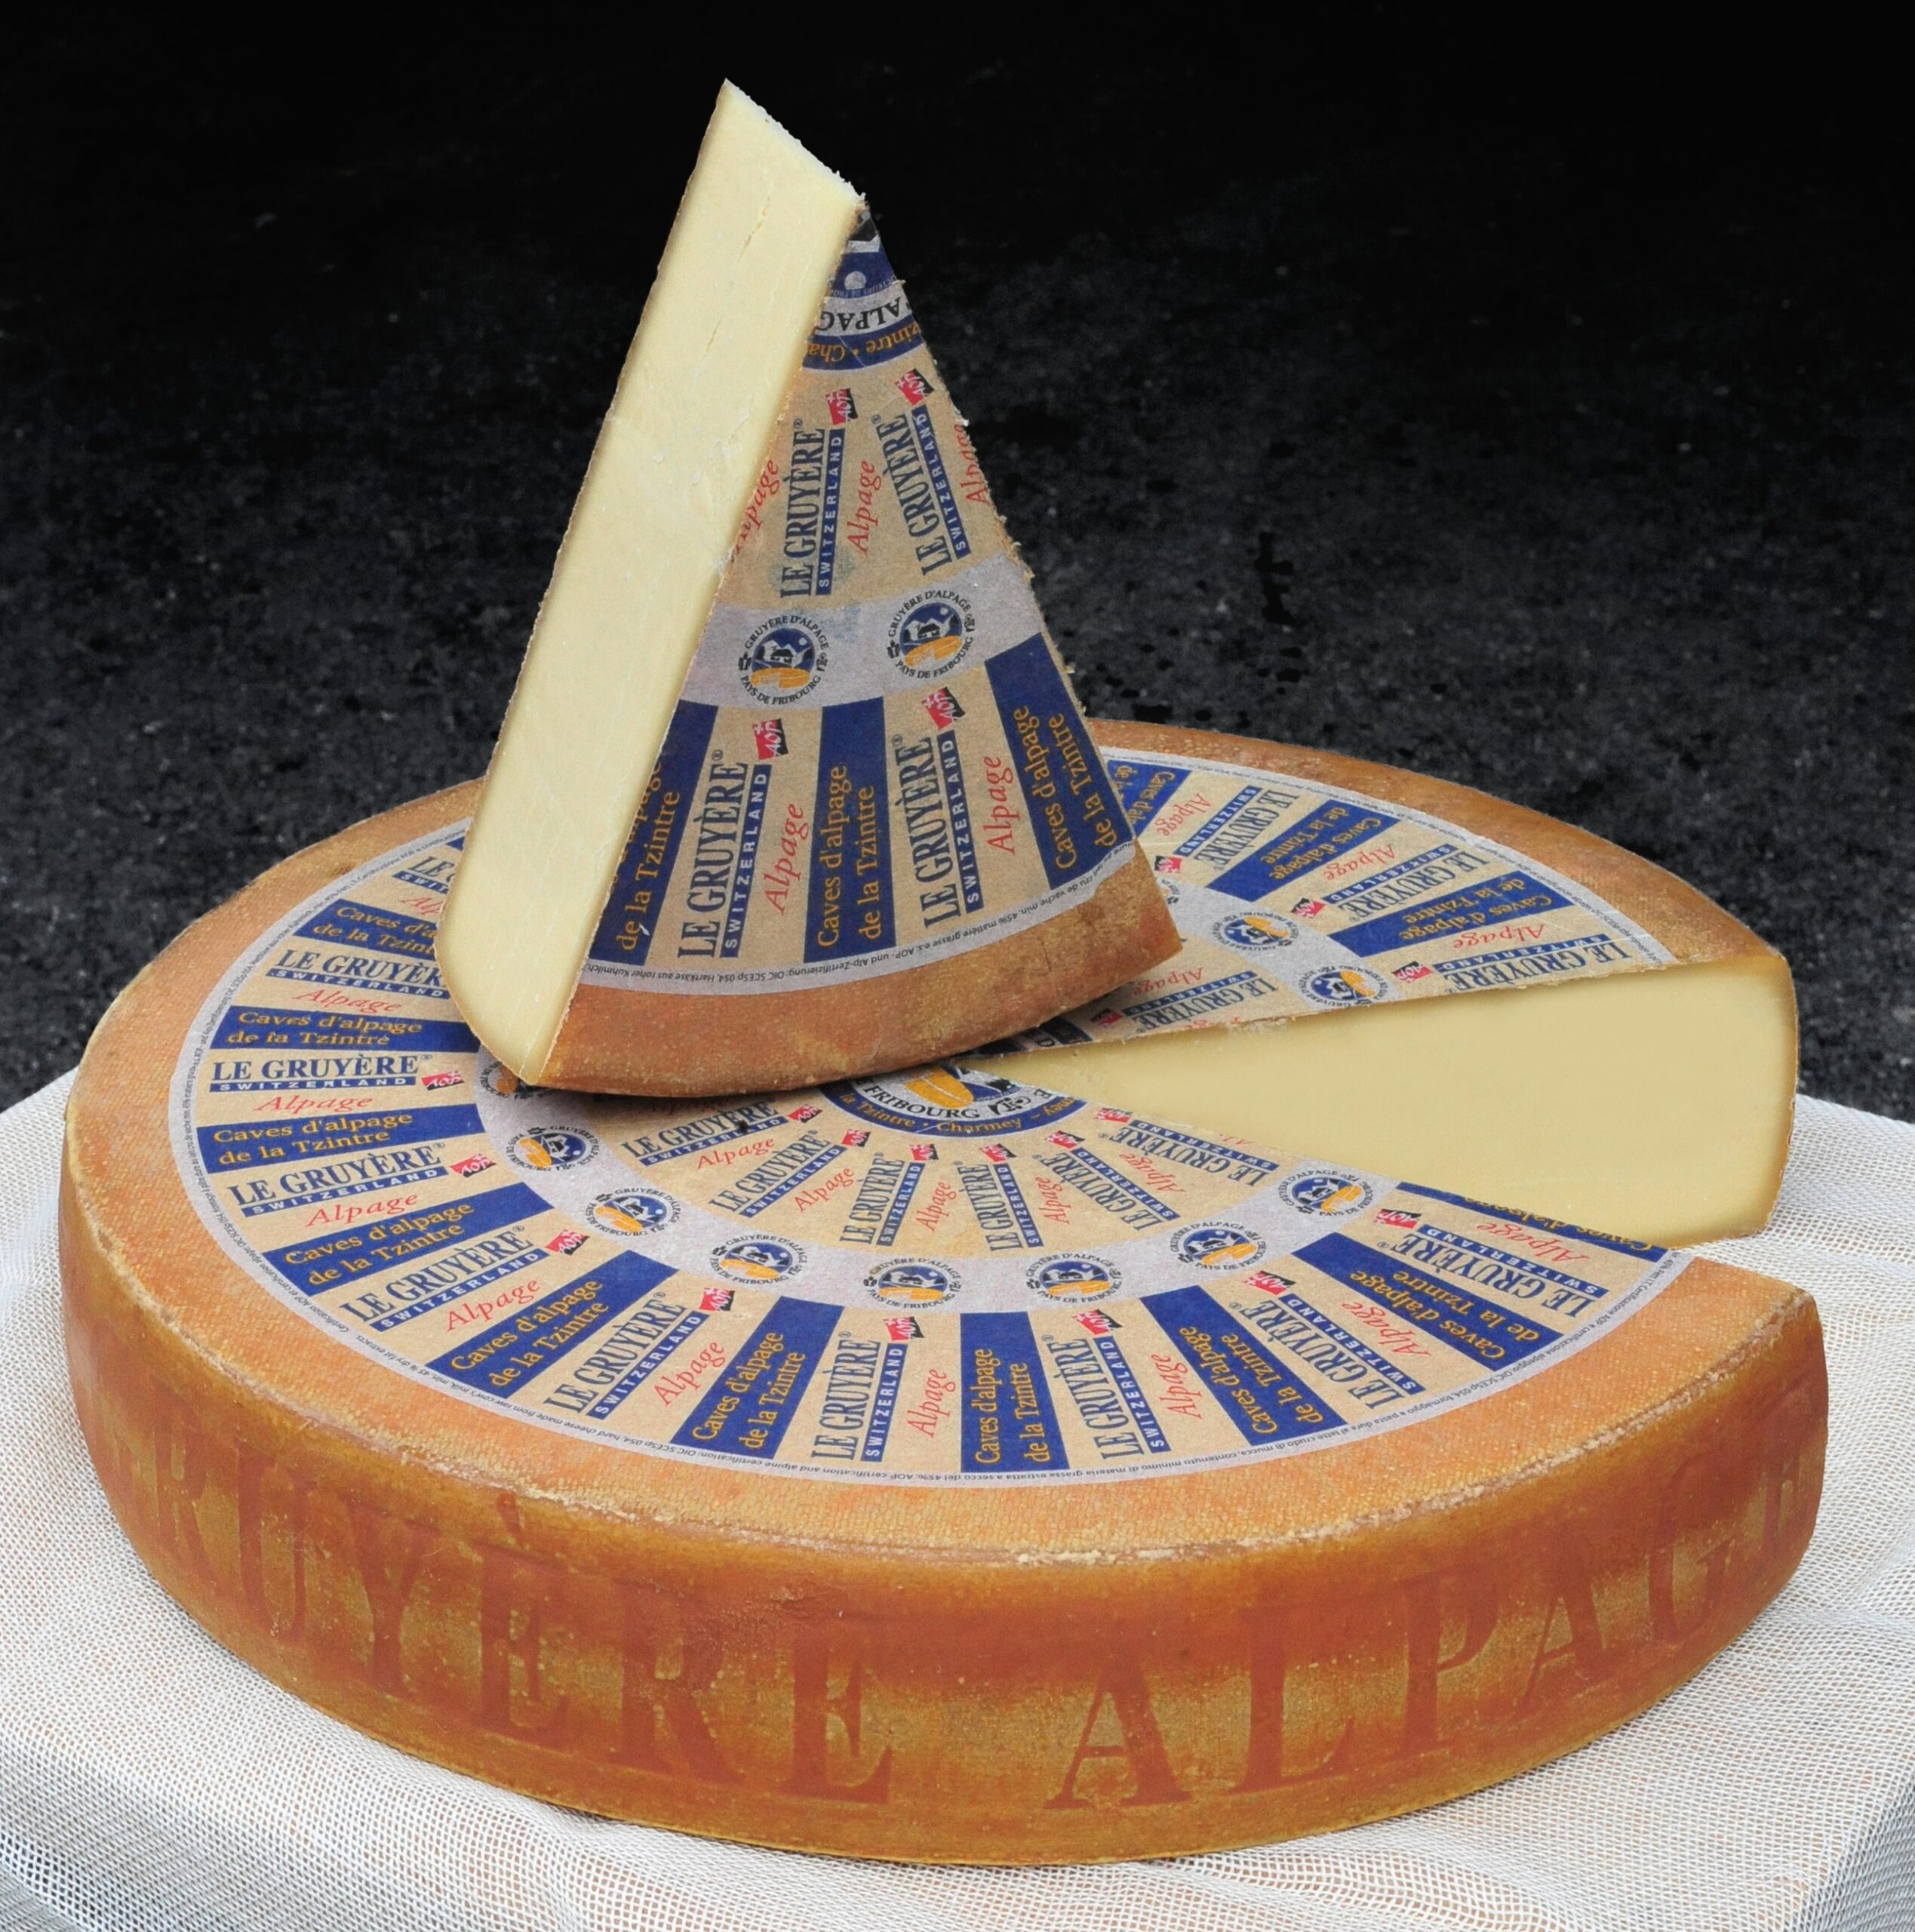 Round-cheese-with-triangle-cut-on-top